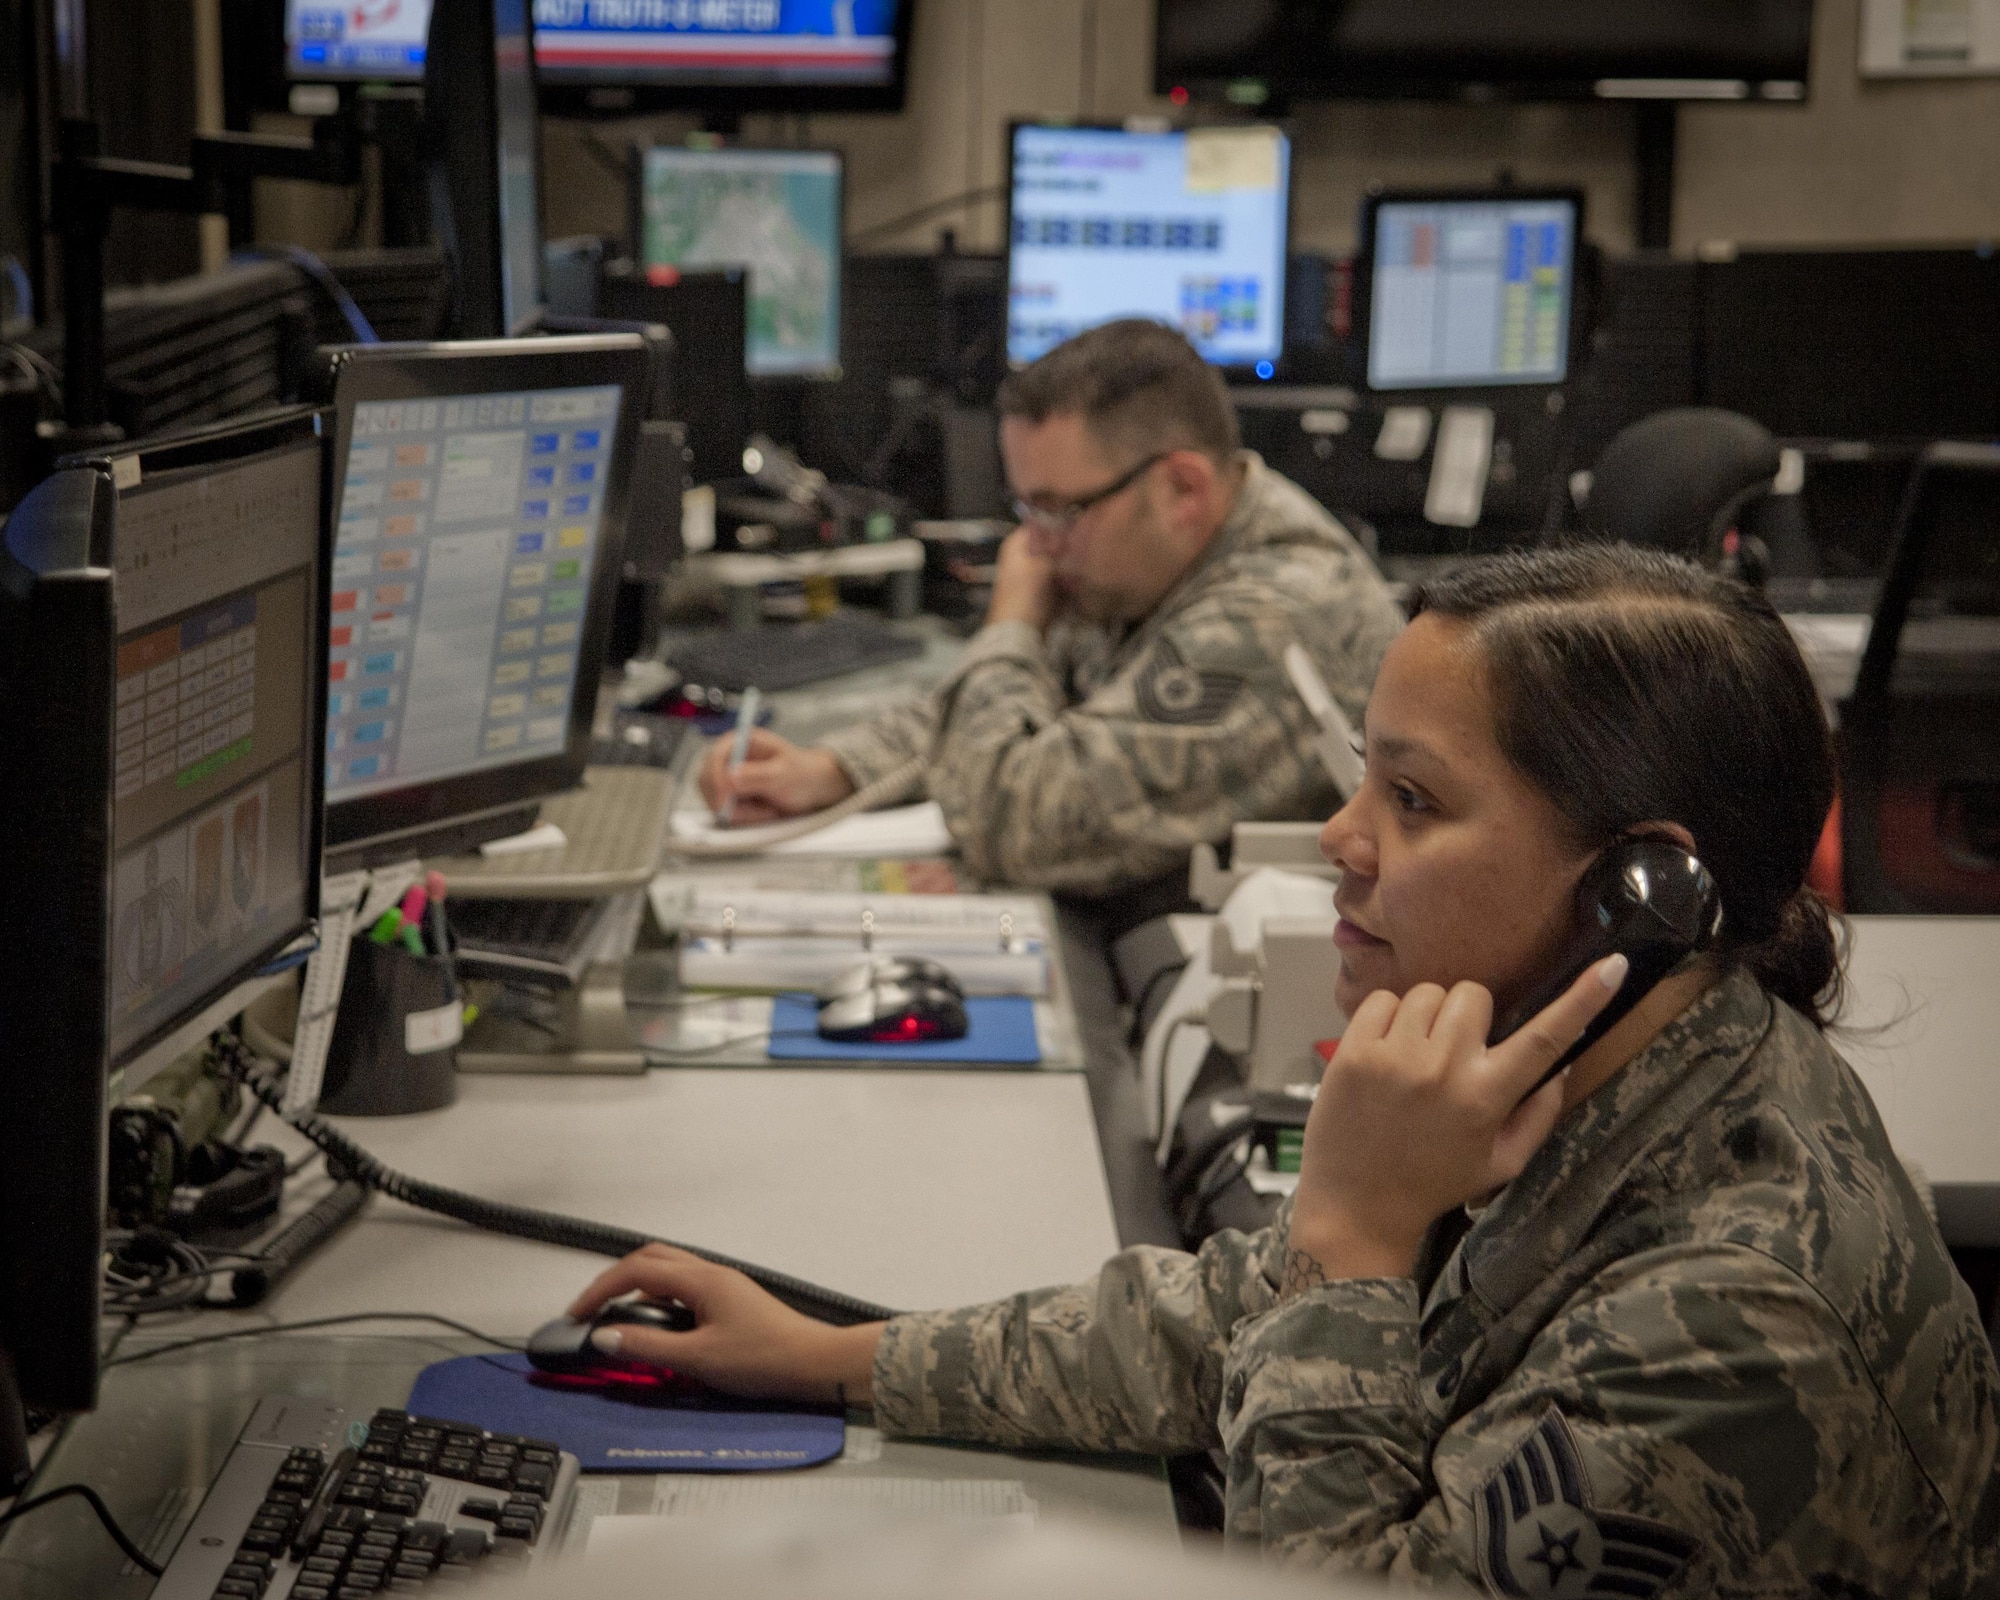 U.S. Air Force Tech. Sgt. James Davis, NCO in charge of systems and Staff Sgt. Sheila Cole, command and control procedures instructor, both assigned to the 6th AMW Command Post, answer calls and monitor data at MacDill Air Force Base, Fla., Feb. 16, 2017. The command post is responsible for relaying critical information throughout the base and to military leaders. (U.S. Air Force photo by Airman 1st Class Mariette Adams)